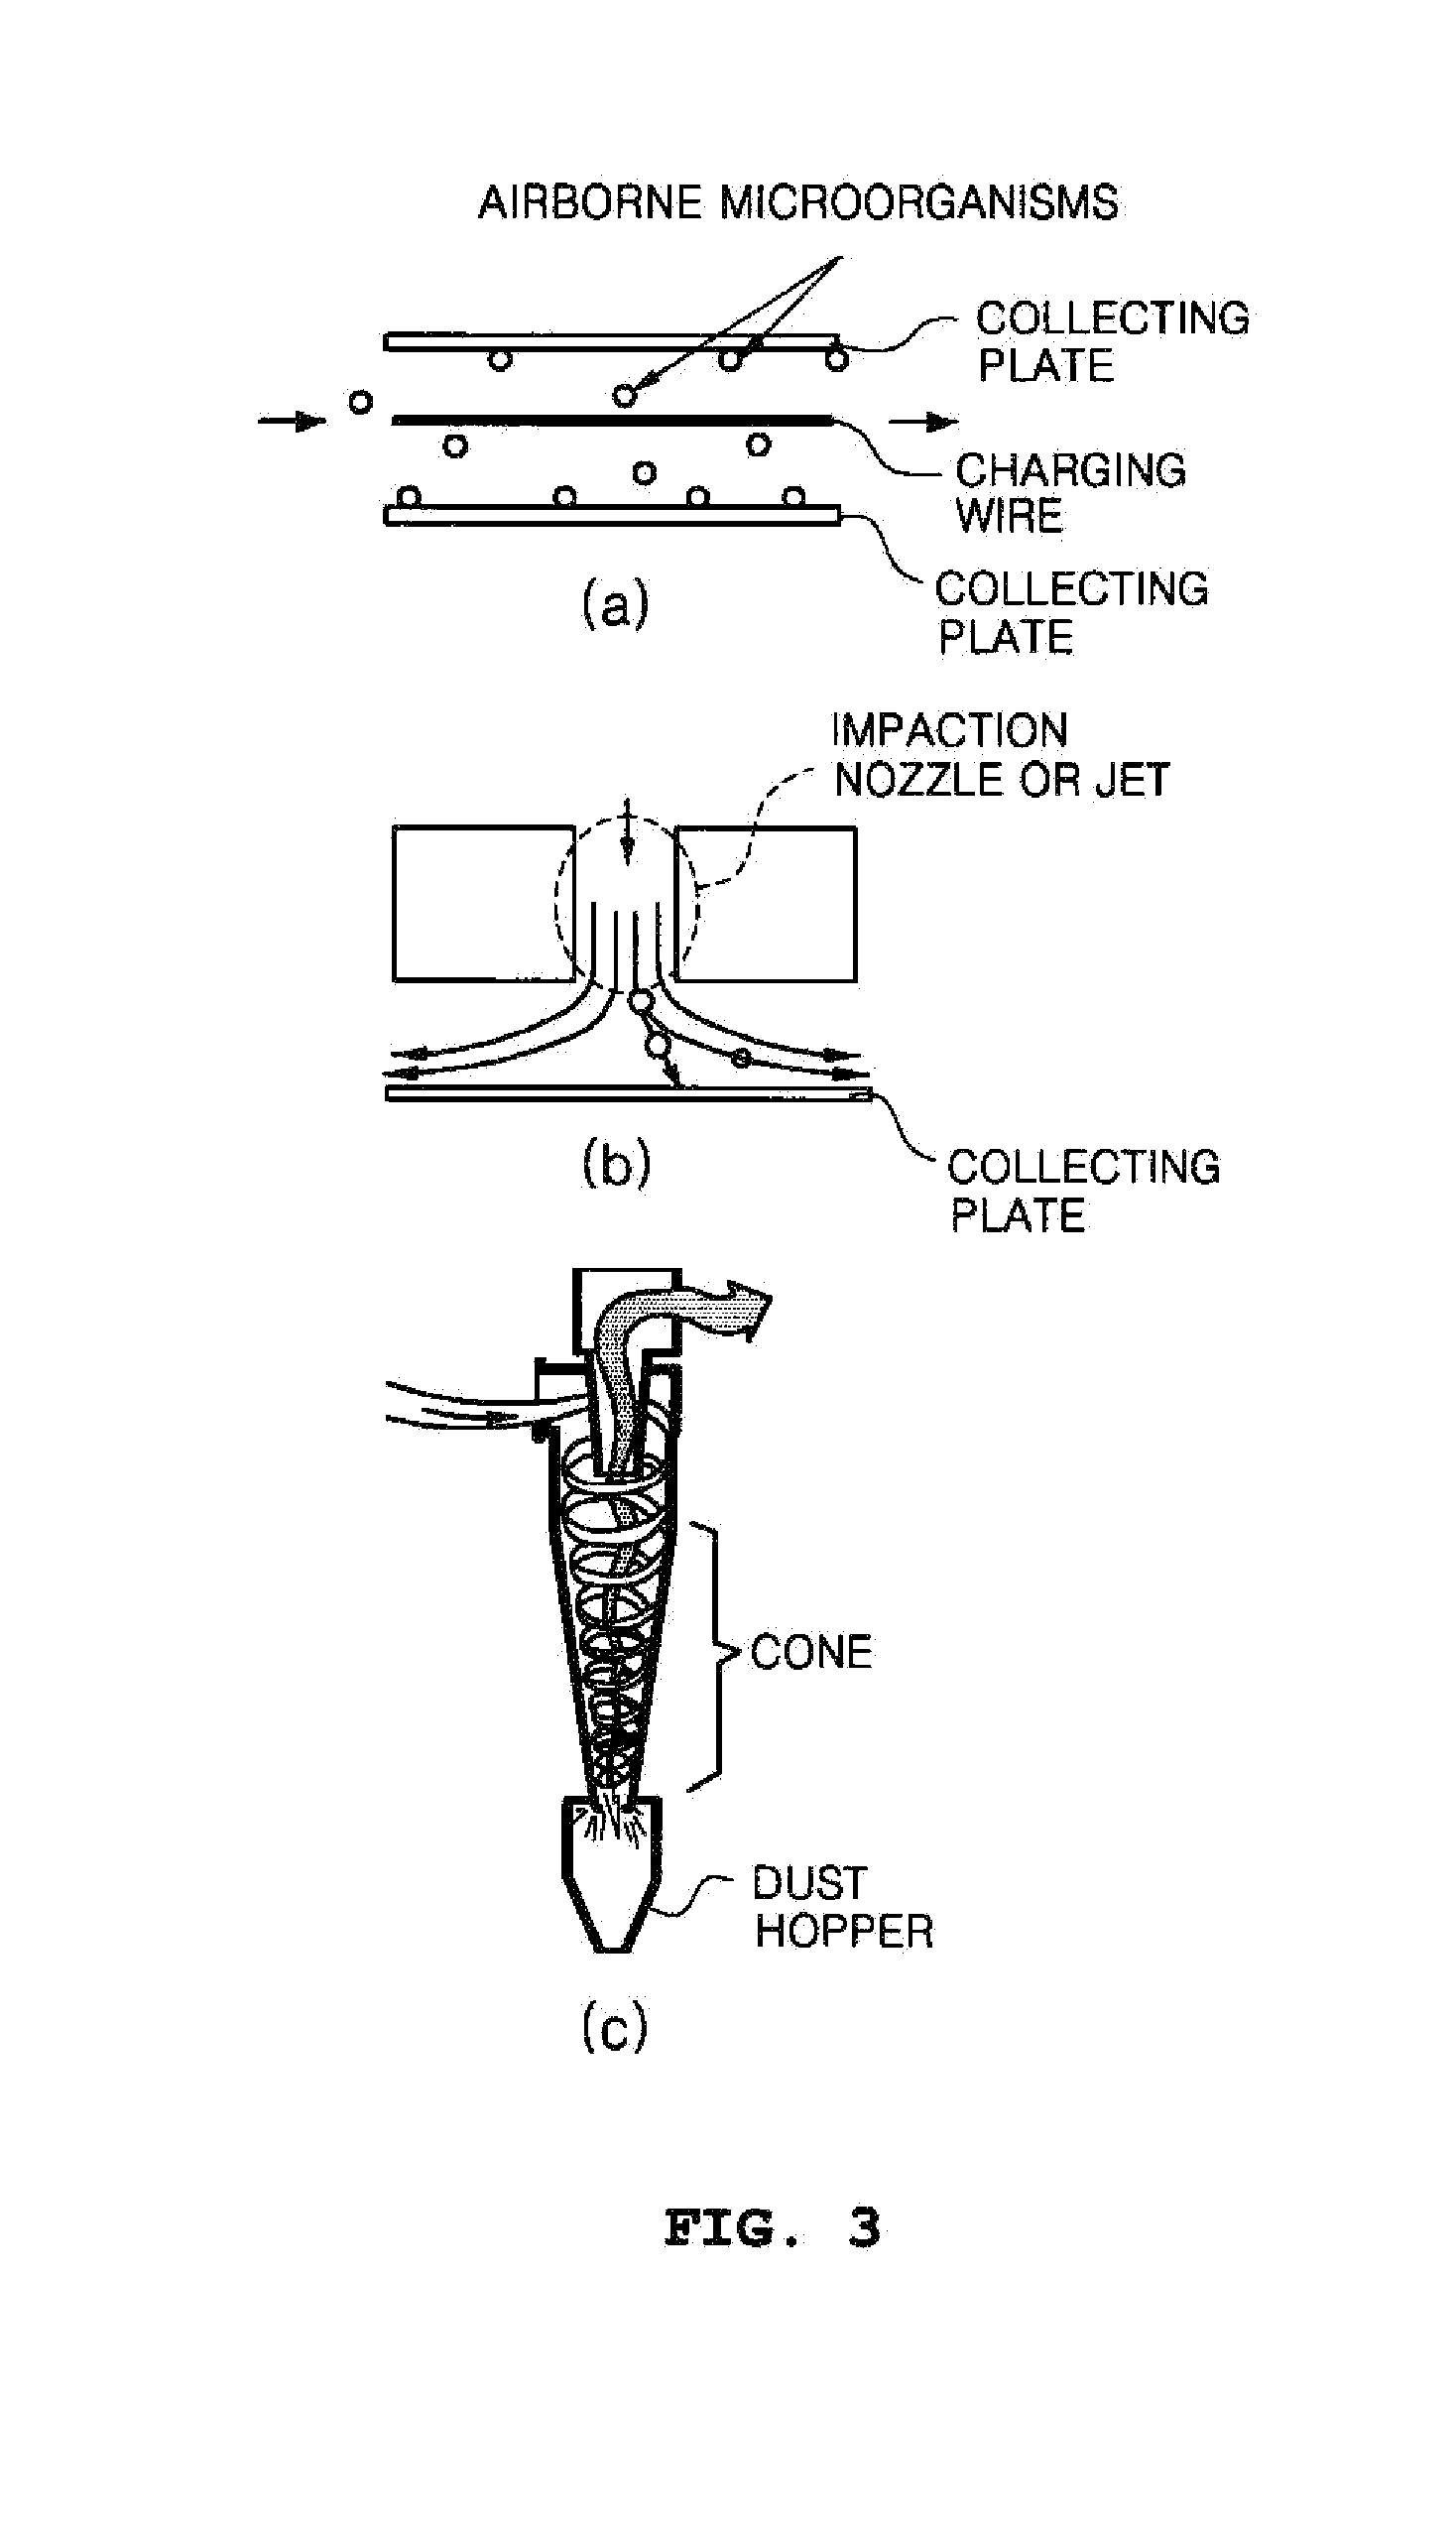 Apparatus for measuring floating microorganisms in a gas phase in real time using a system for dissolving microorganisms and atp illumination, and method for detecting same